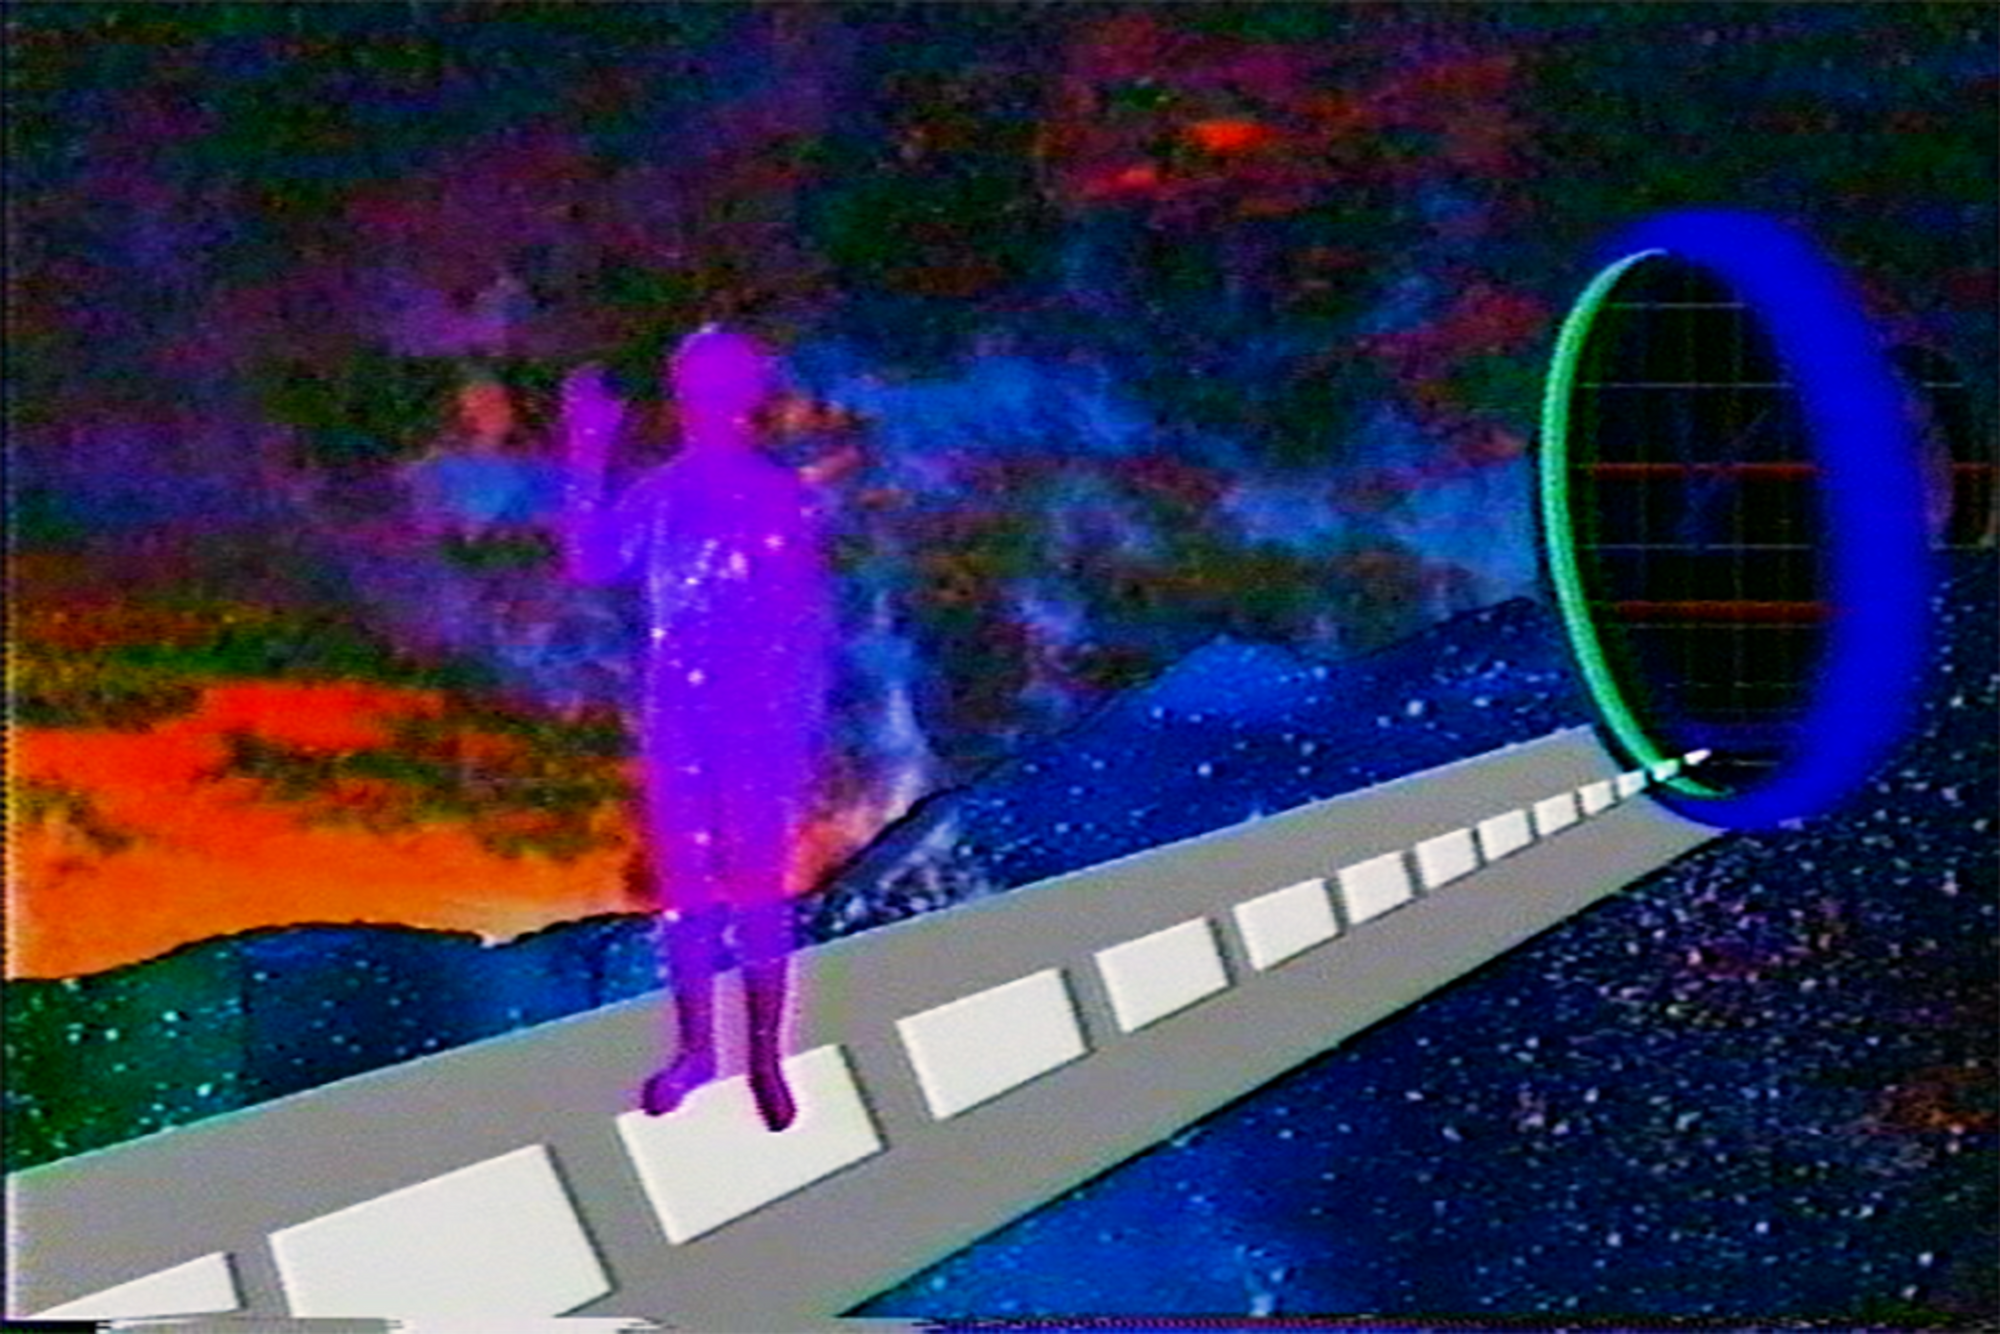 Video still from "Looking Forward Thru Time" 01 of 19, 2020